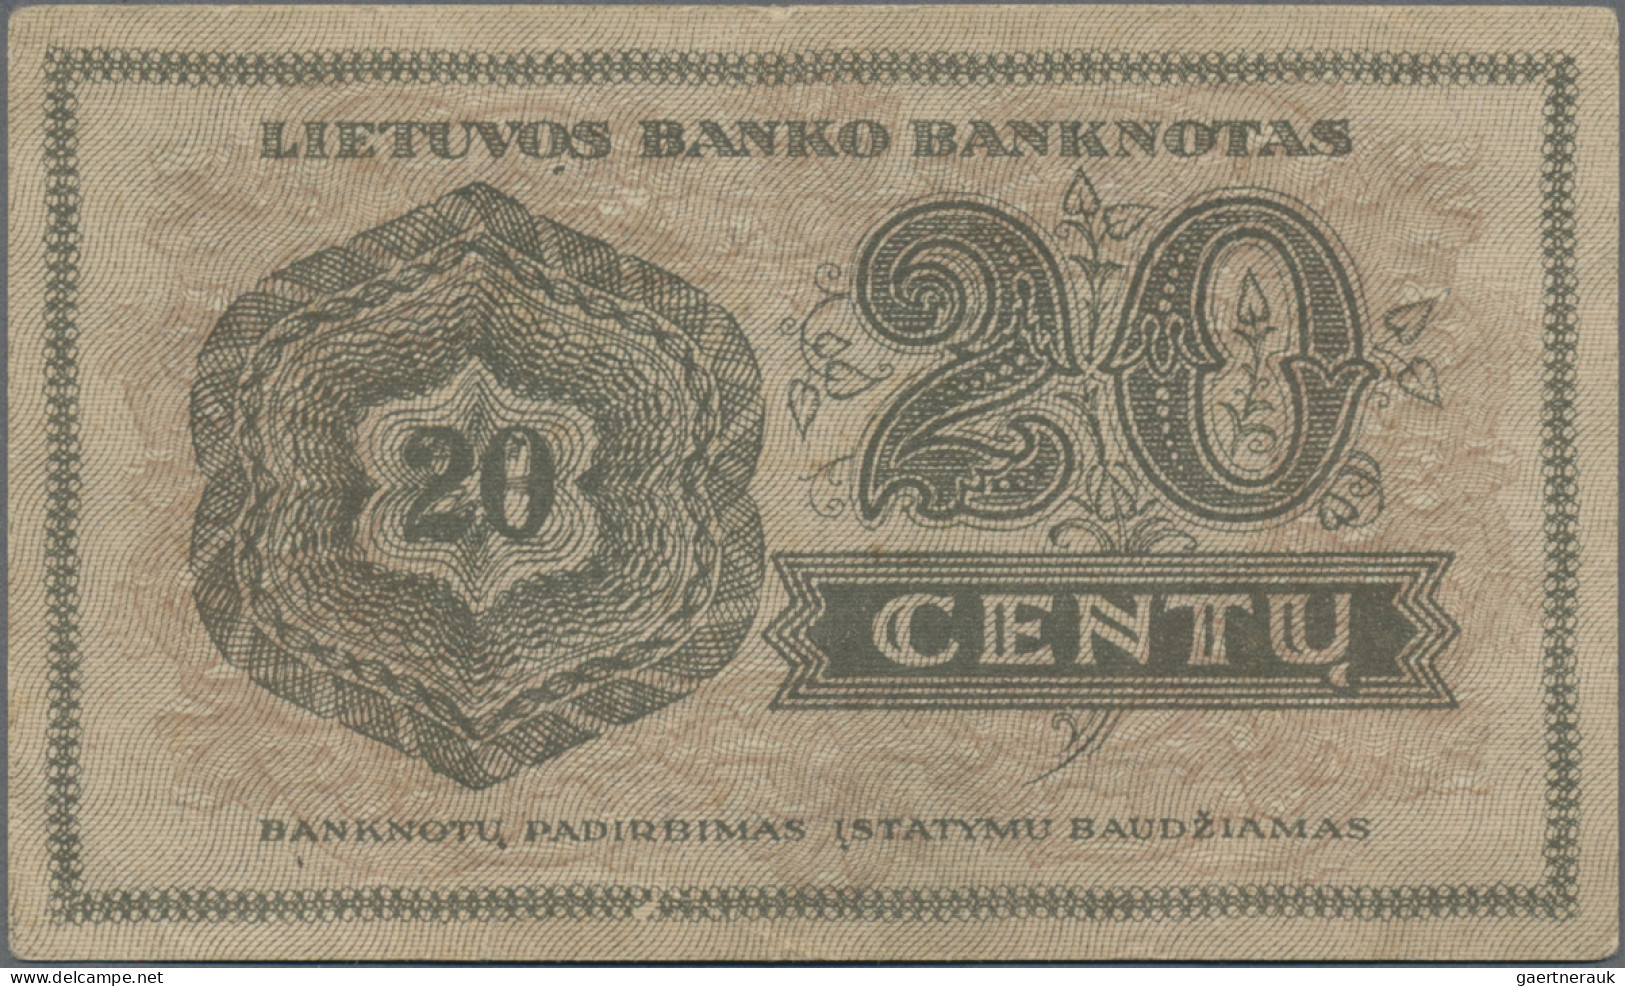 Lithuania: Lietuvos Bankas, set with 4 banknotes, series 1922, with 1 Centas (P.